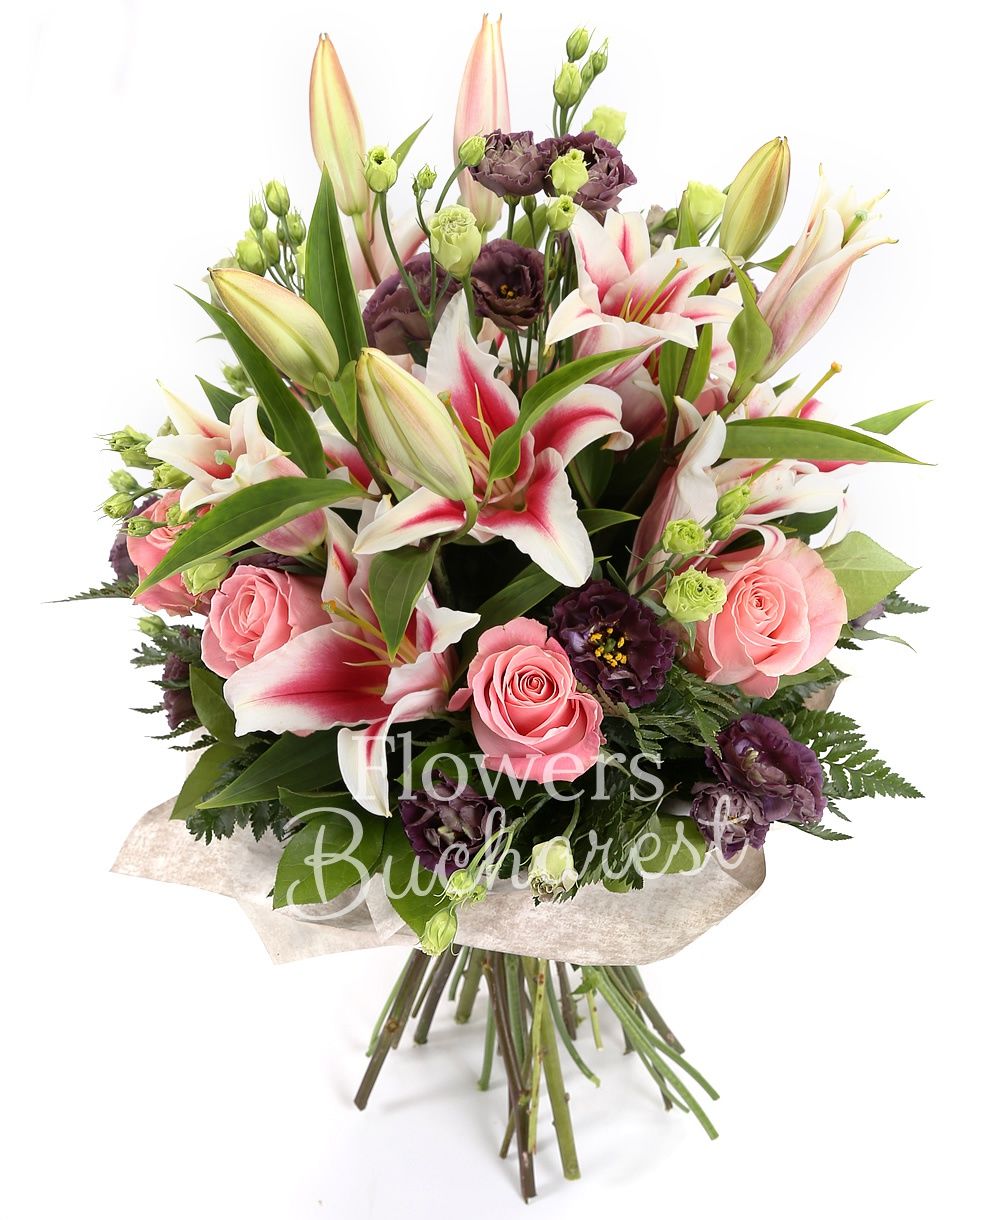 7 pink roses, 3 pink lilies, 7 lisianthus, greenery